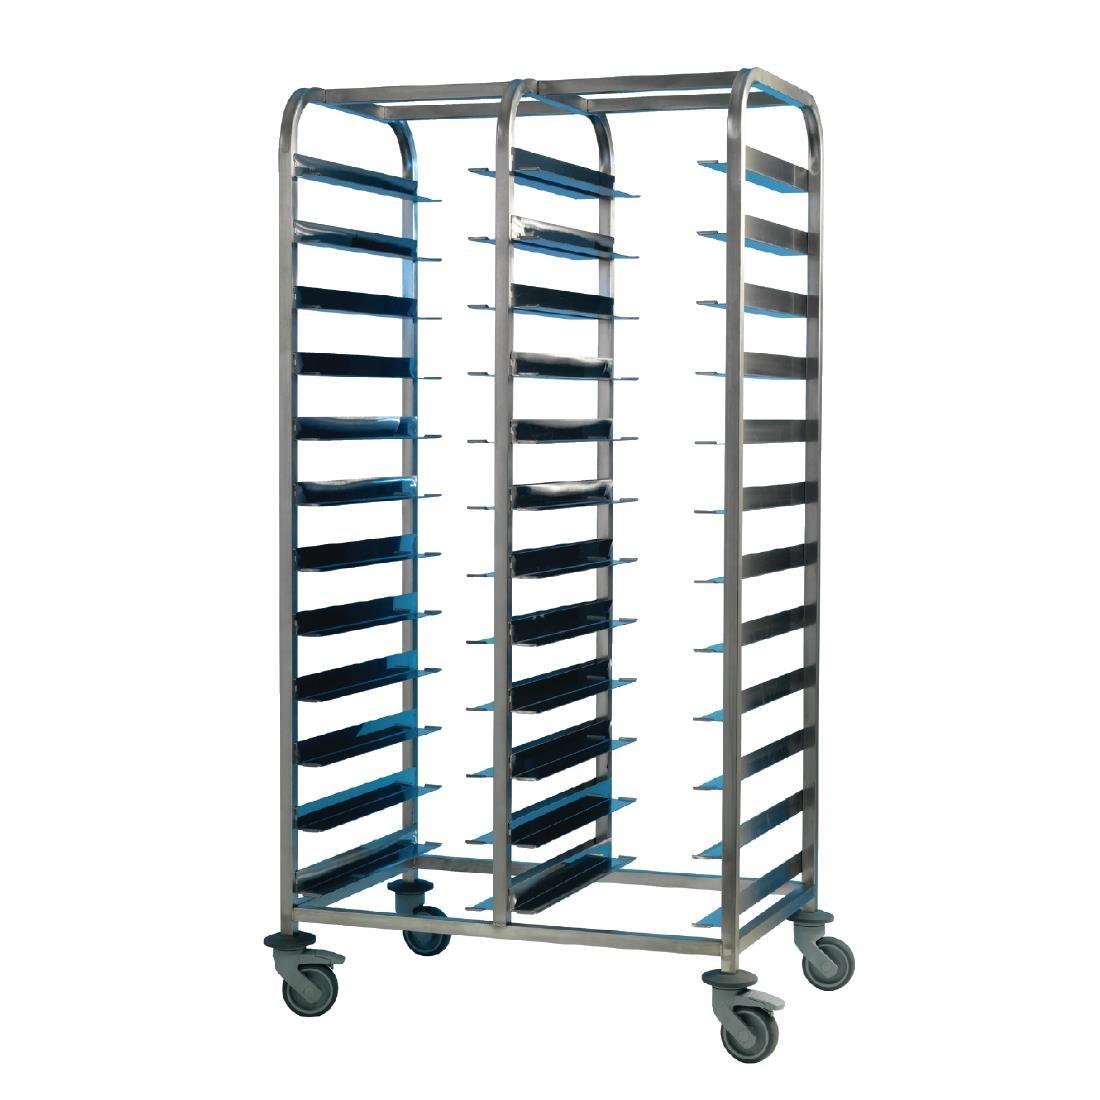 EAIS Stainless Steel Clearing Trolley 24 Shelves - DP293  - 1